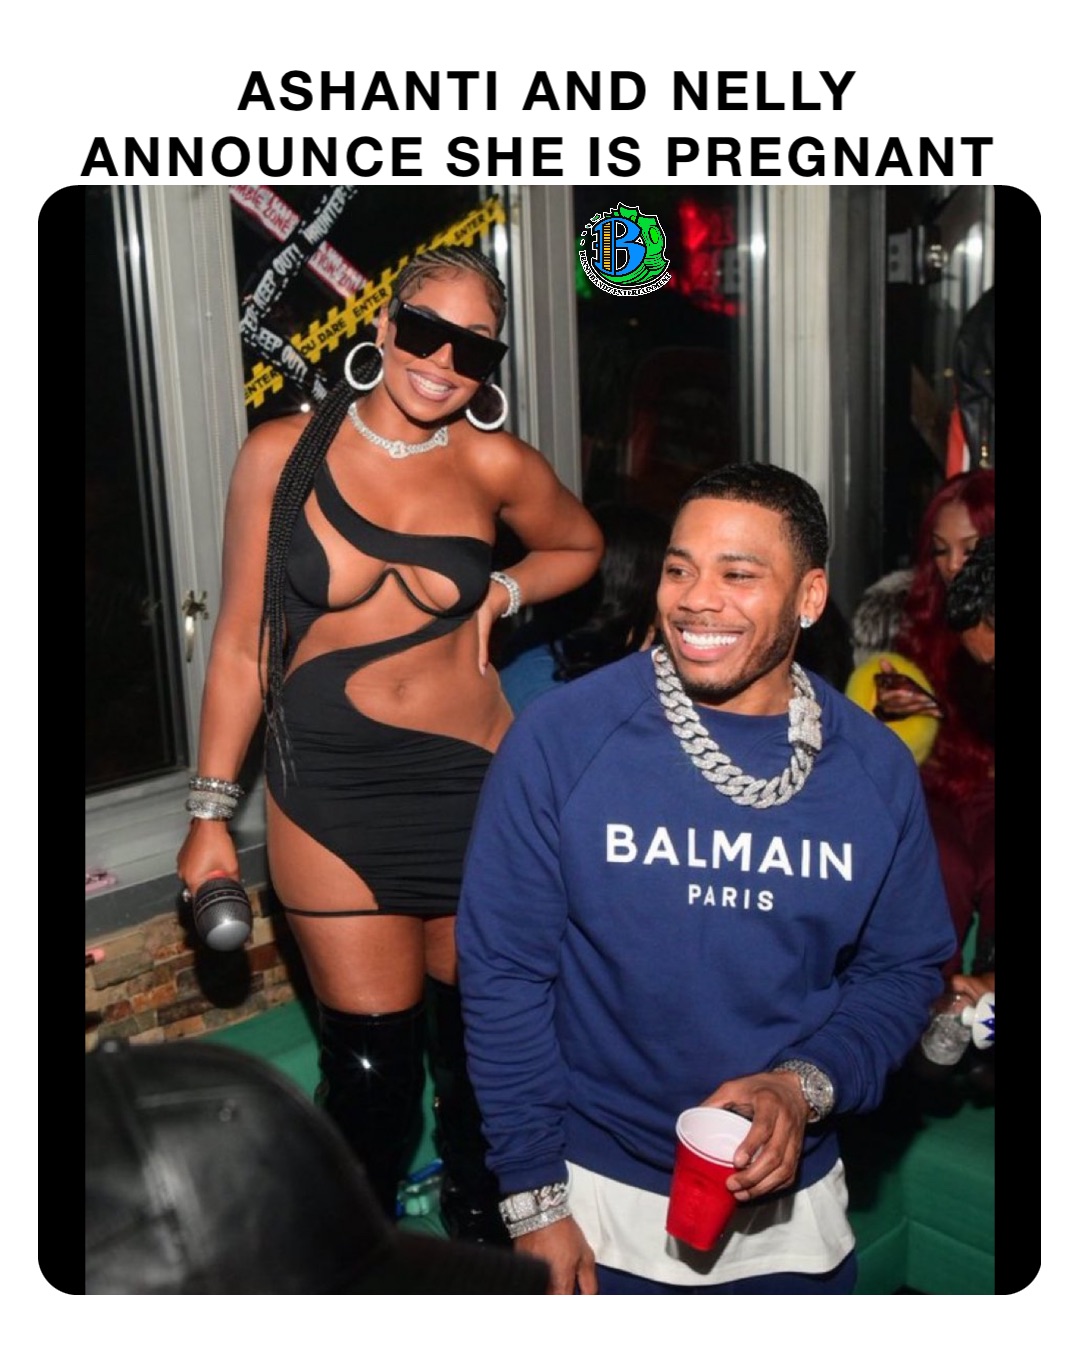 Ashanti and Nelly announce she is pregnant